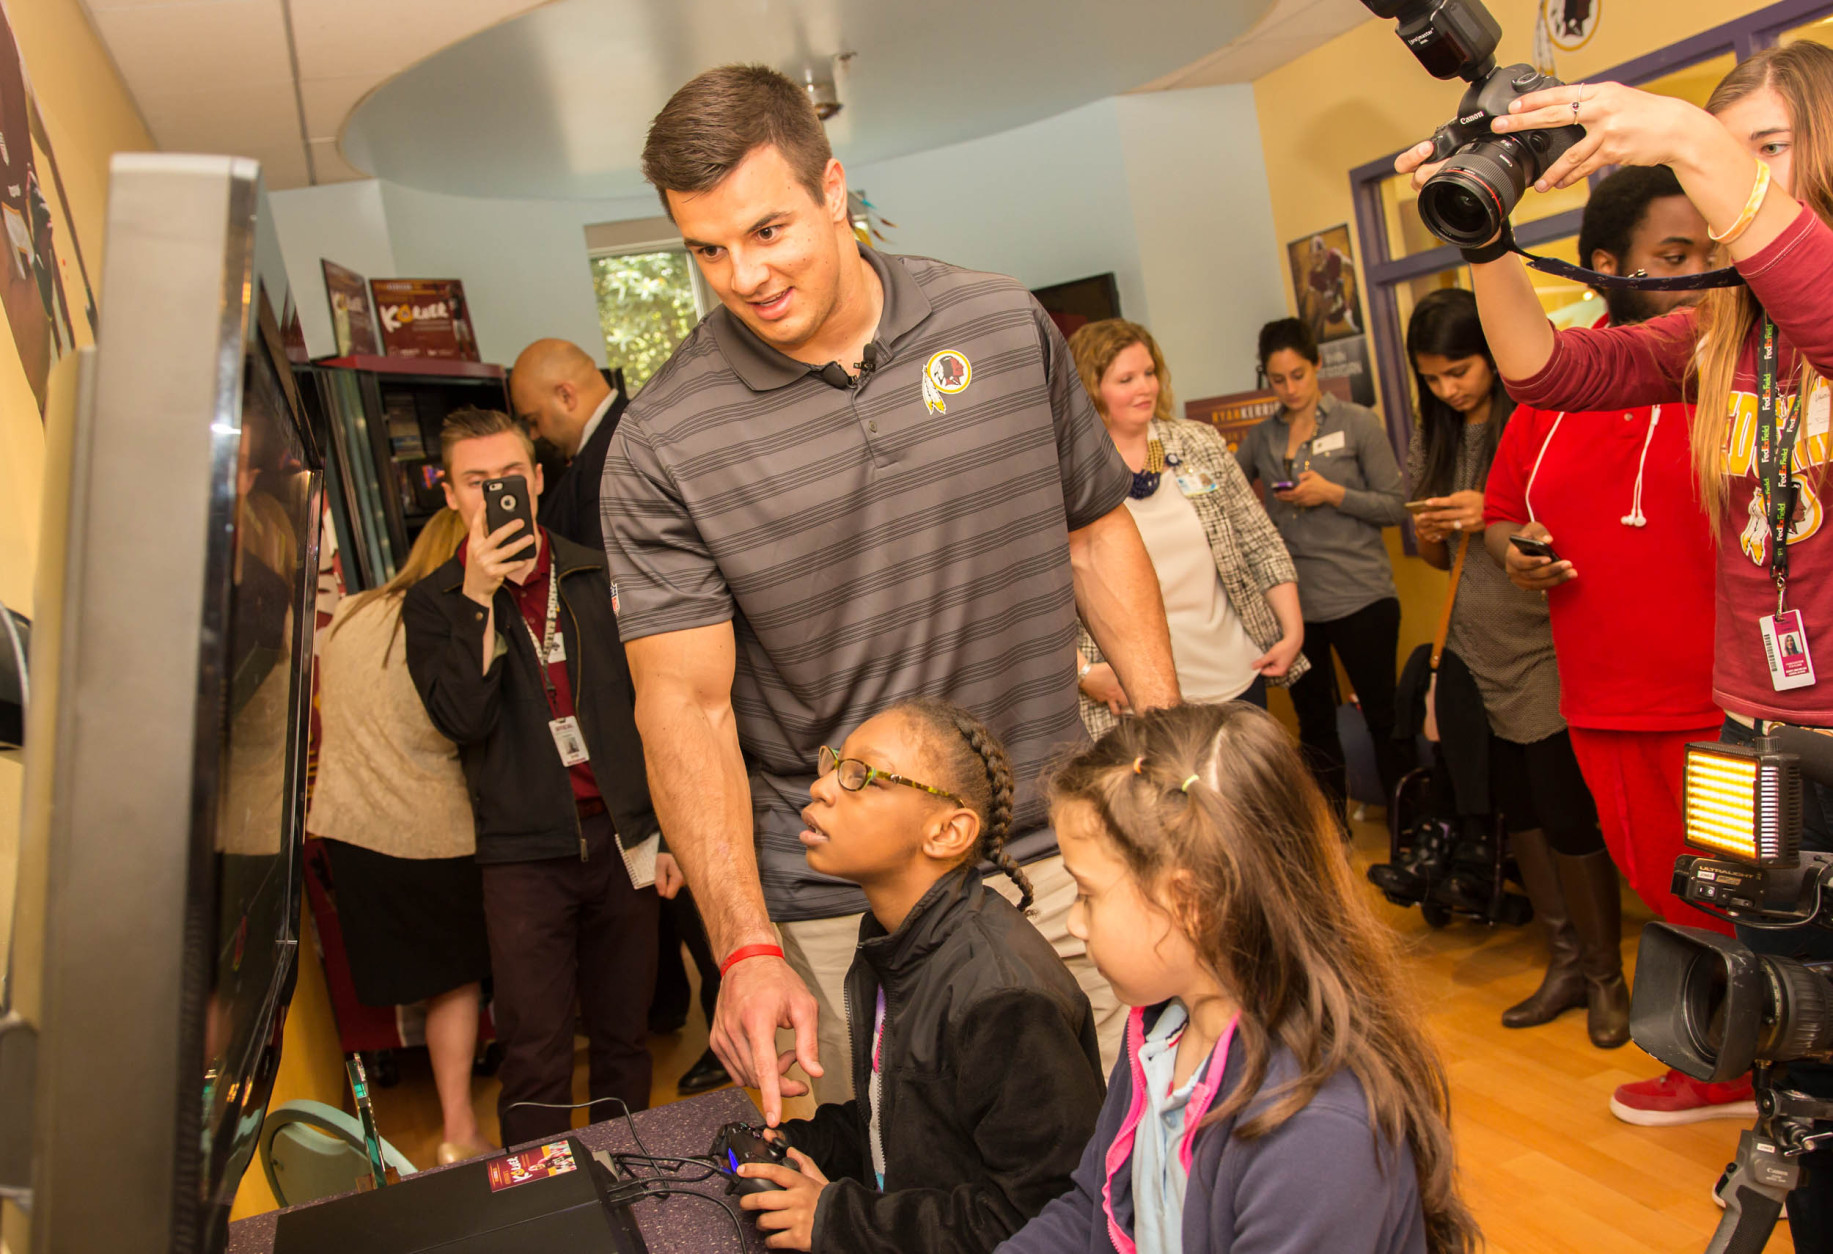 Redskins linebacker Ryan Kerrigan joked that the kids didn't want to play football but rather another video game that was 'more fun.' (Courtesy Prolanthropy)